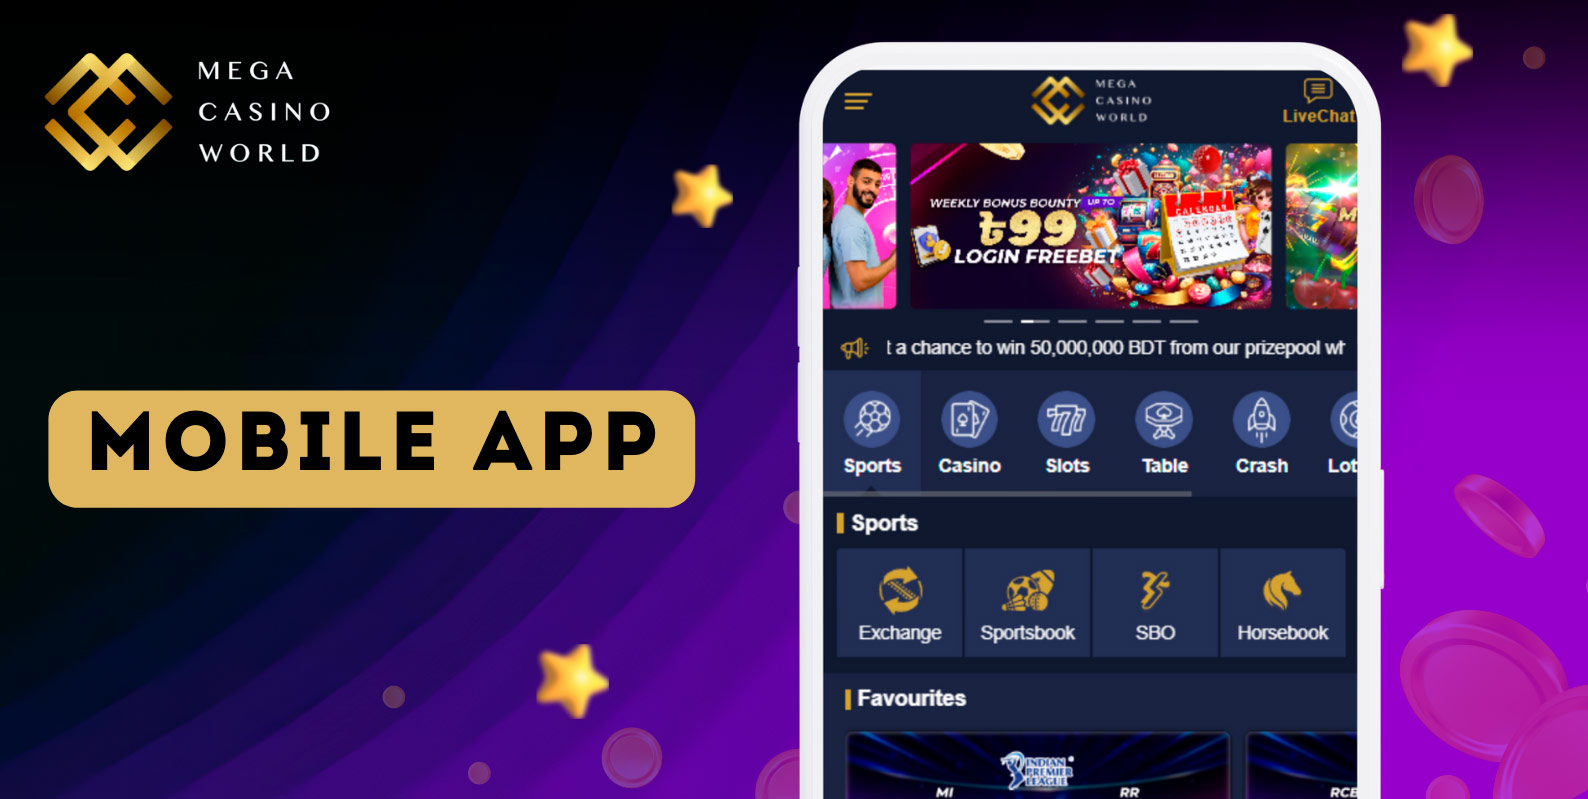 Access the MCW Online Casino Mobile App and Register for a New Account